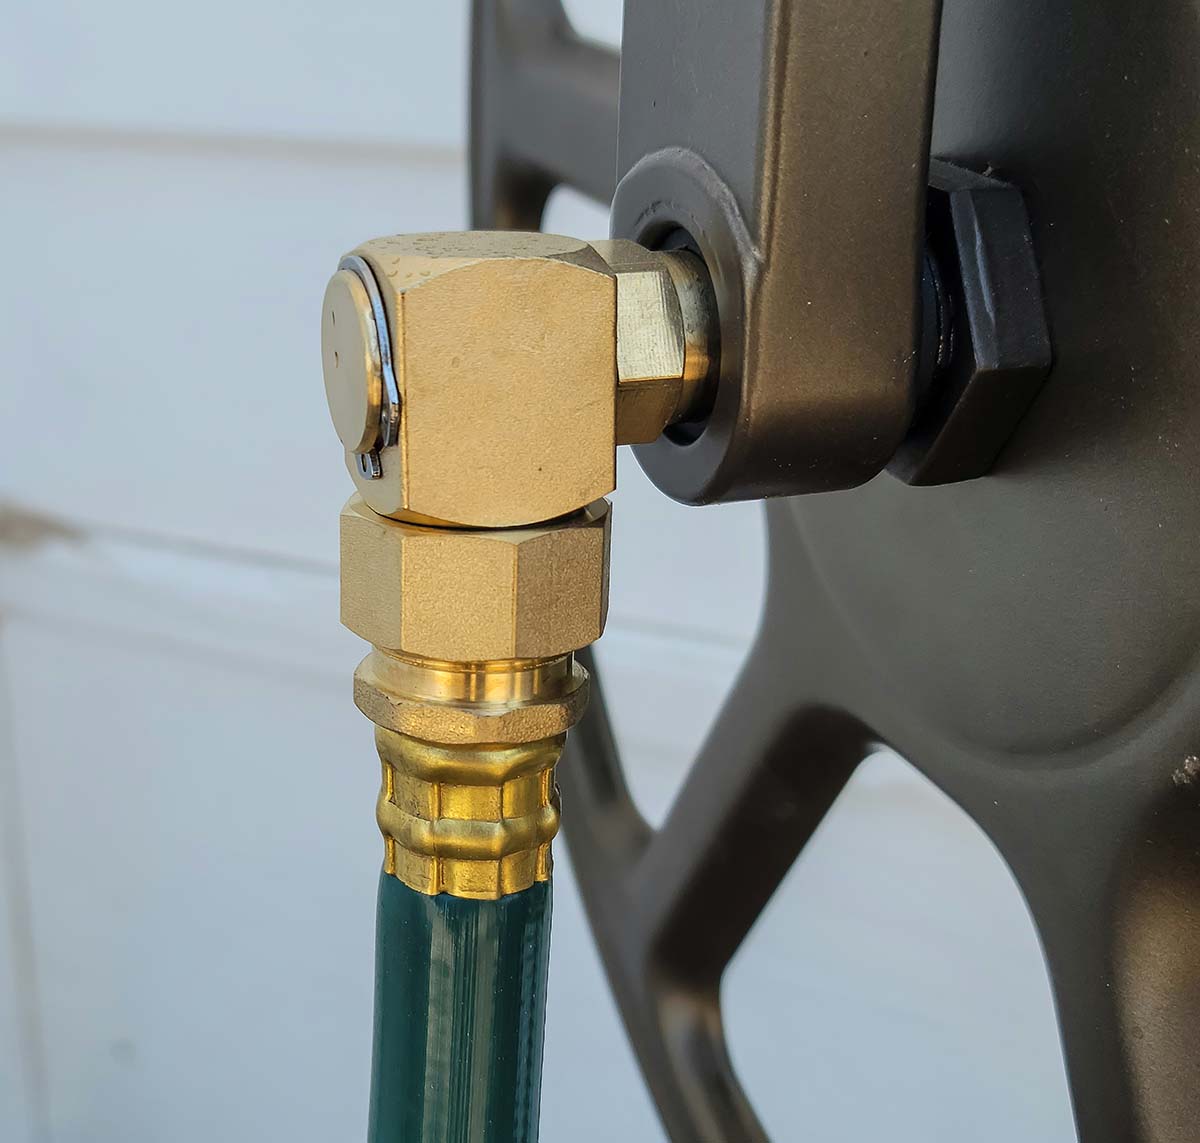 Brass hose connection on the Liberty hose reel